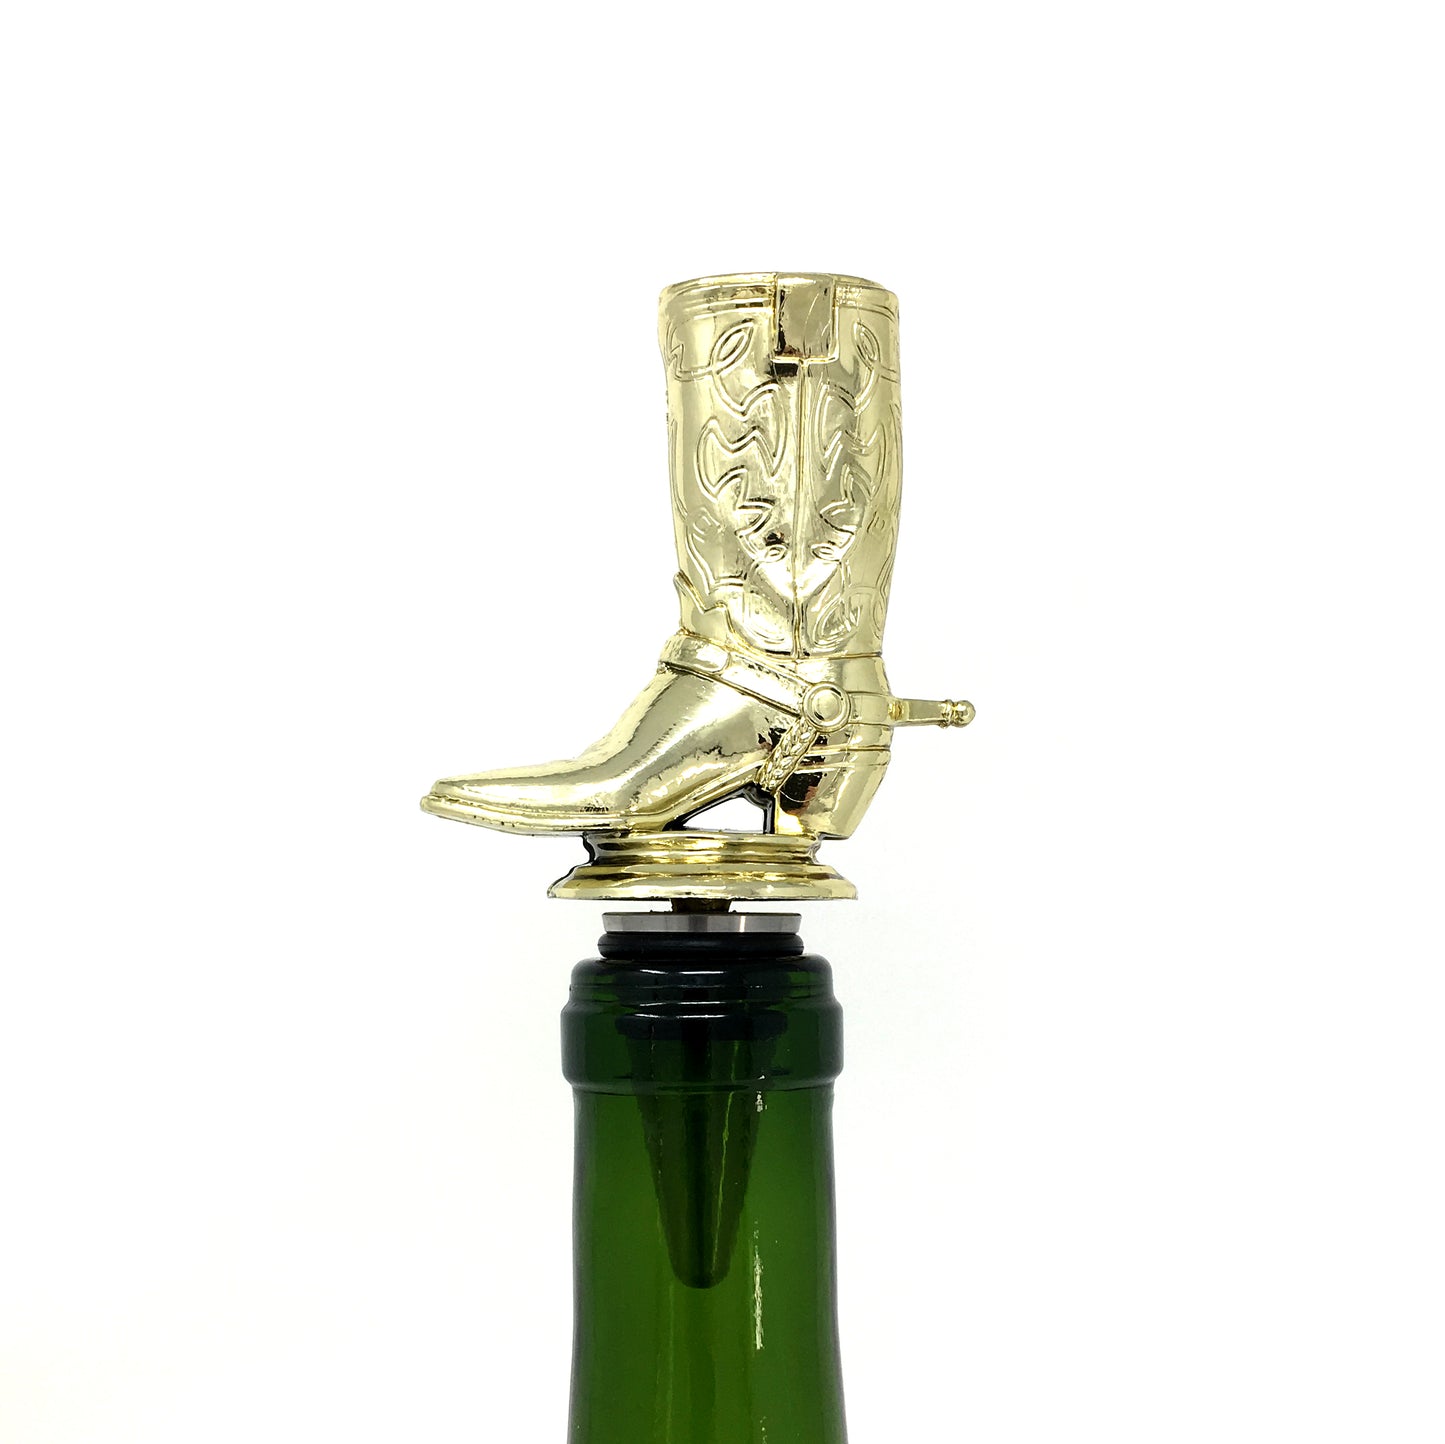 Cowboy Boot Trophy Wine Bottle Stopper with Stainless Steel Base